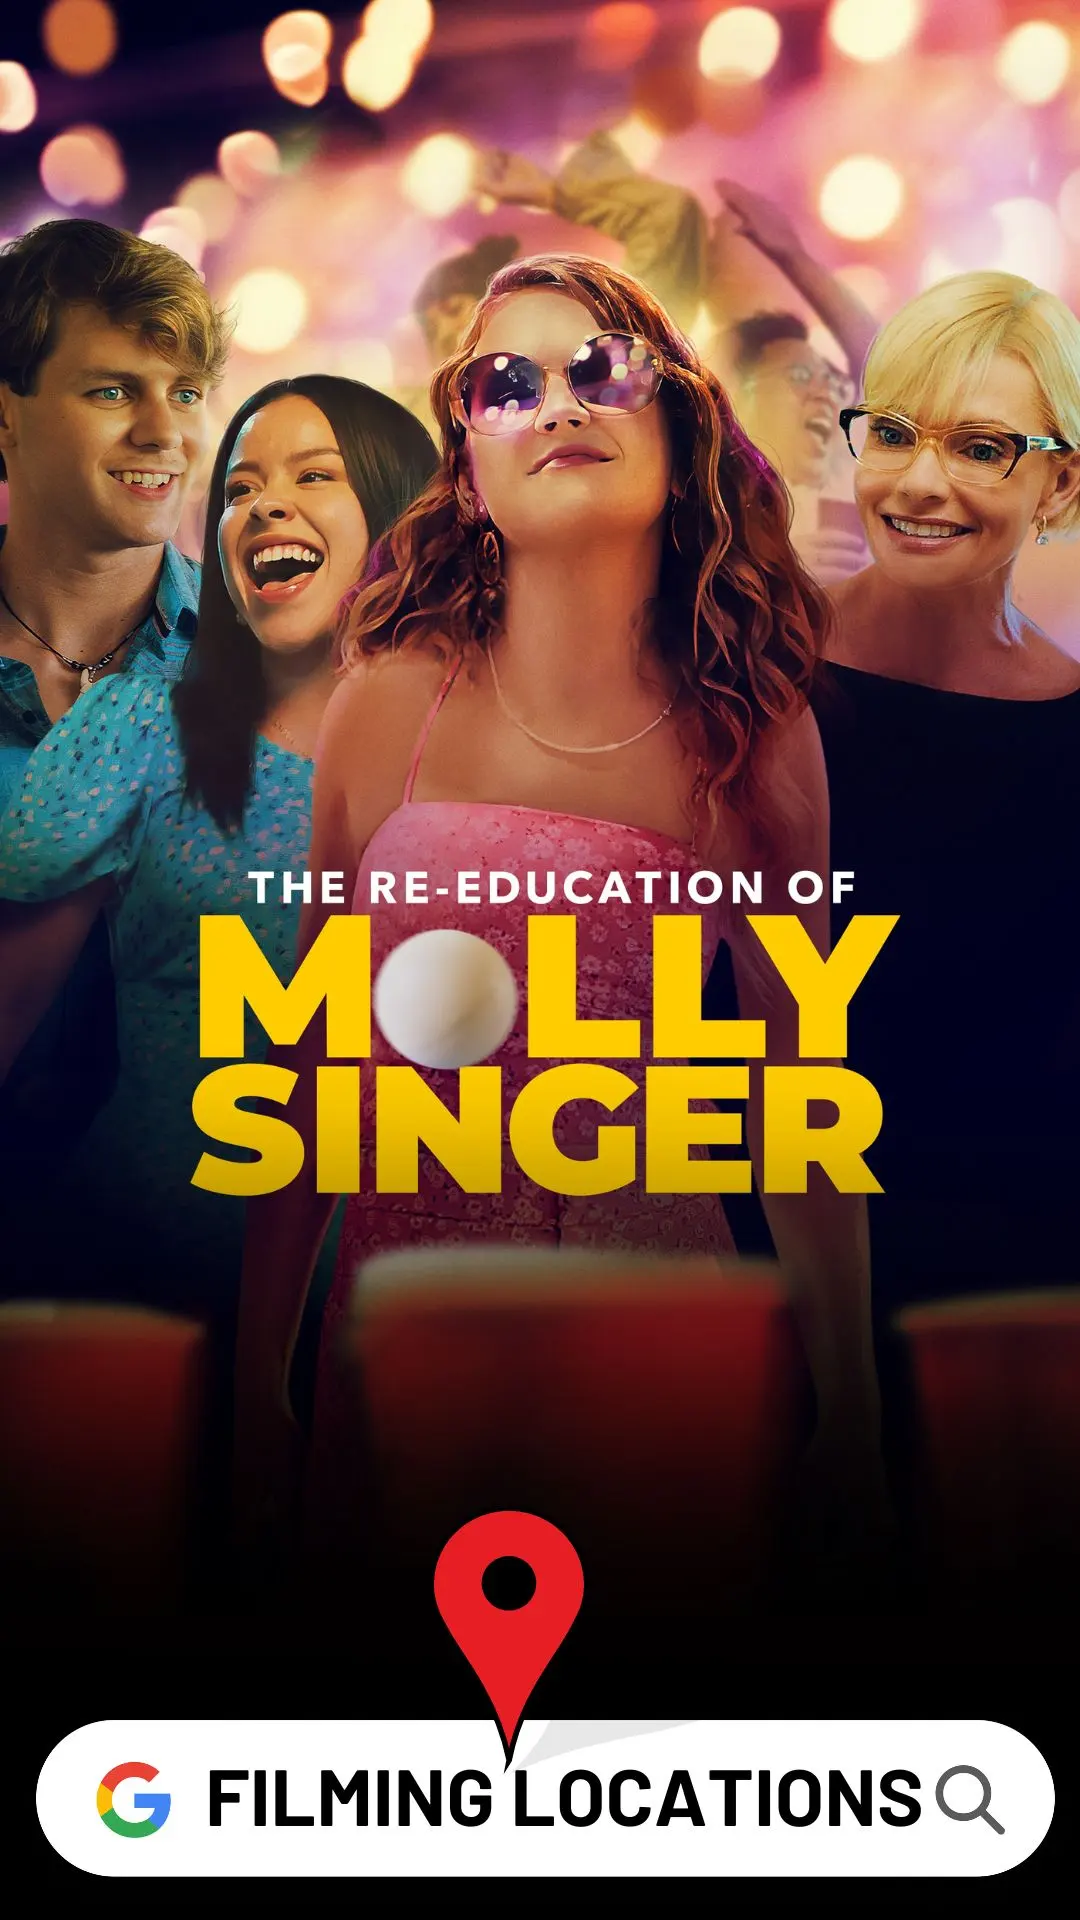 The Re-Education of Molly Singer Filming Locations